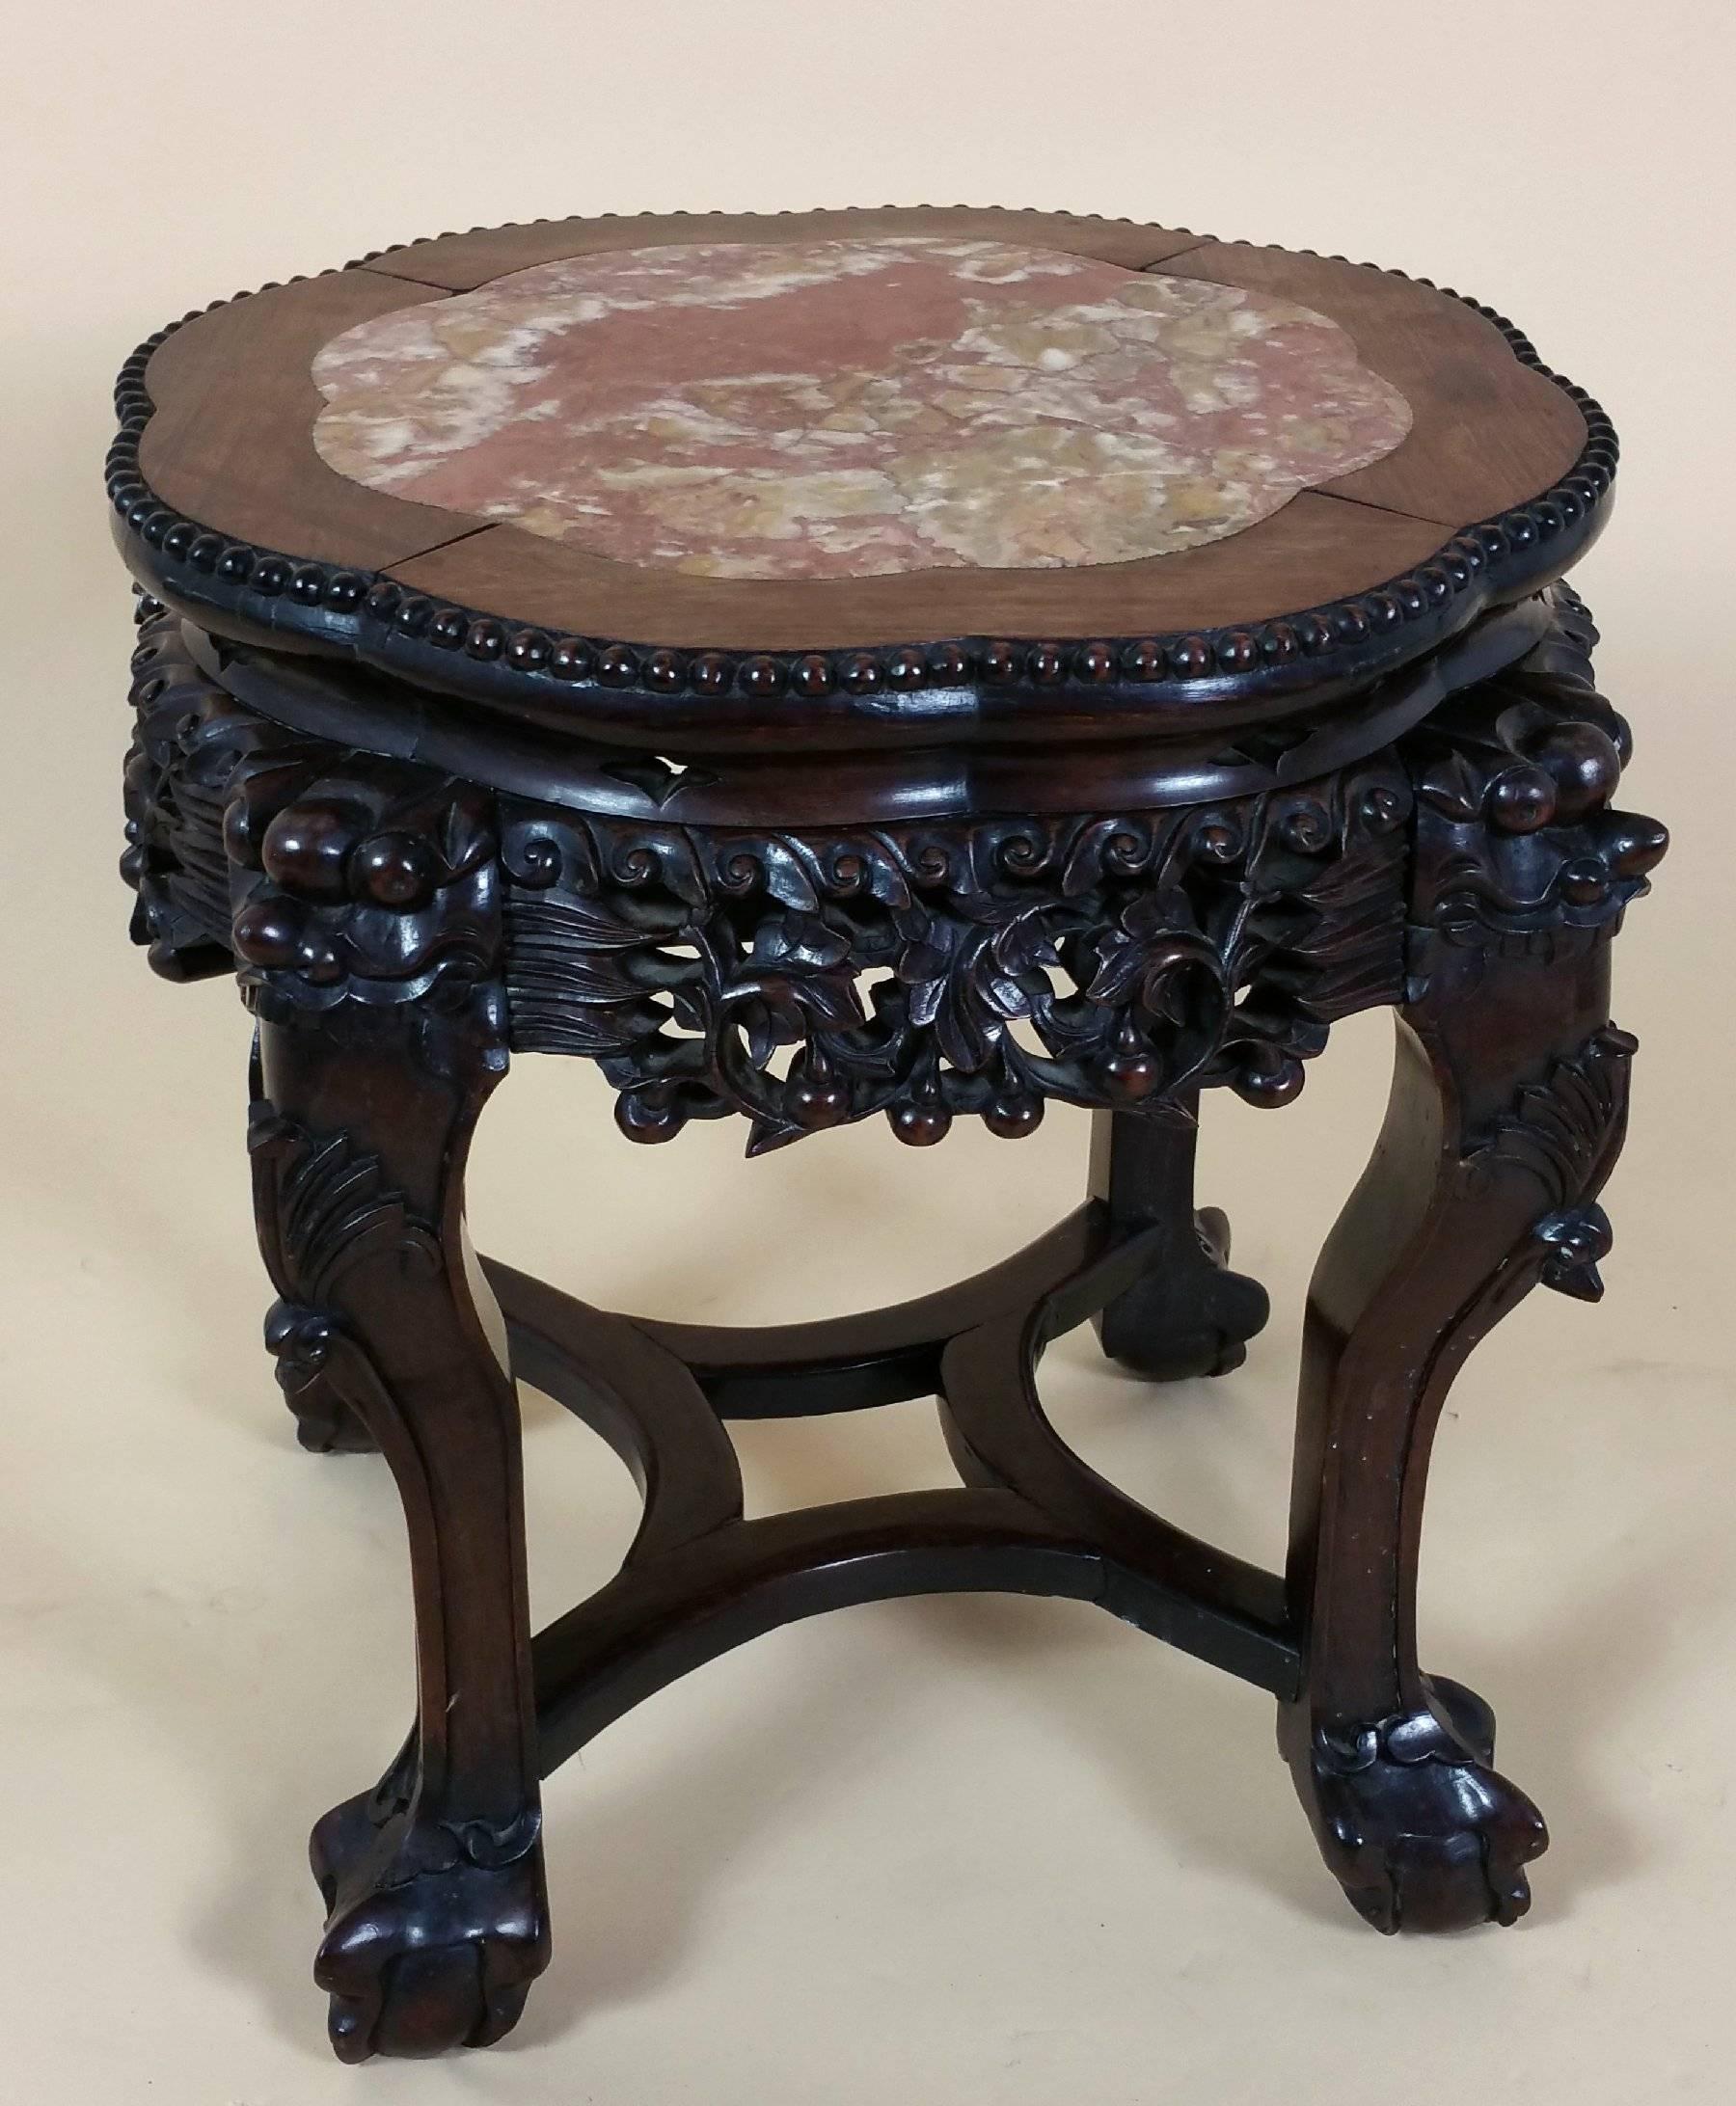 This very decorative 19th century Chinese hardwood stand features an attractive marble inset top and shaped stretcher base. The stand has an ornately carved apron around the outside rim with squared cabriole legs on ball and claw feet. It measures